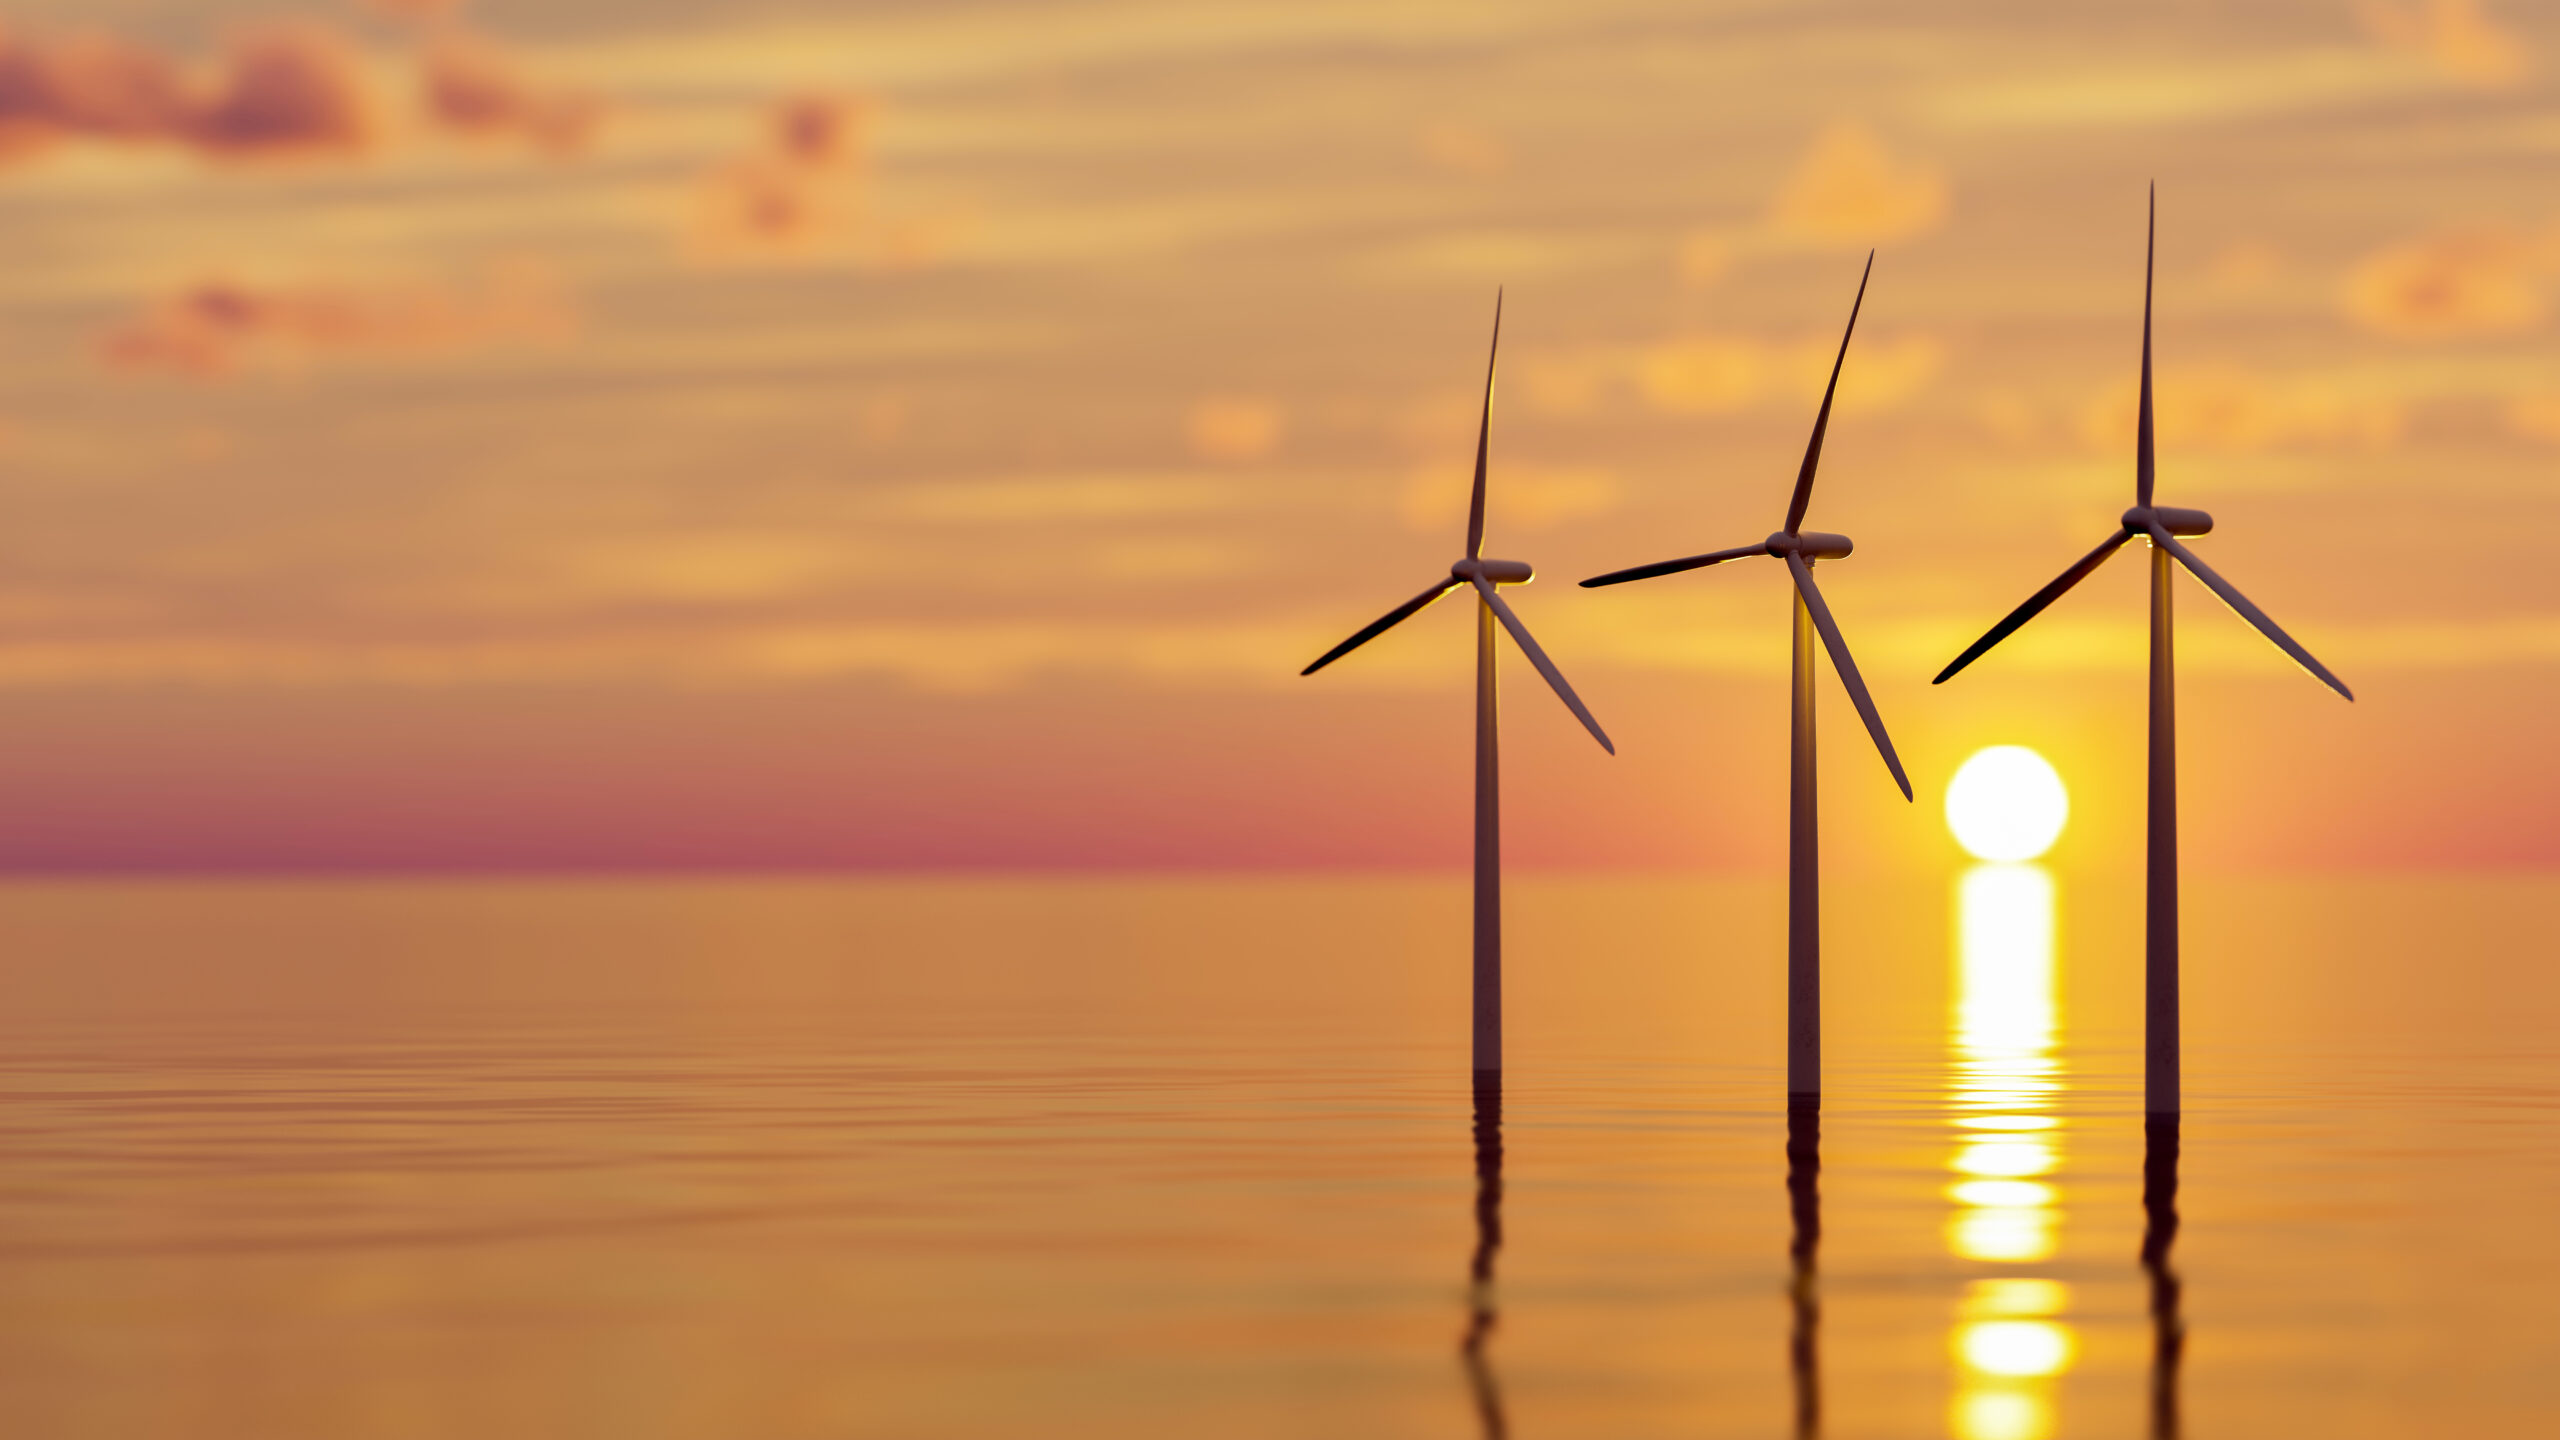 image: offshore wind turbines in front of a sunset.